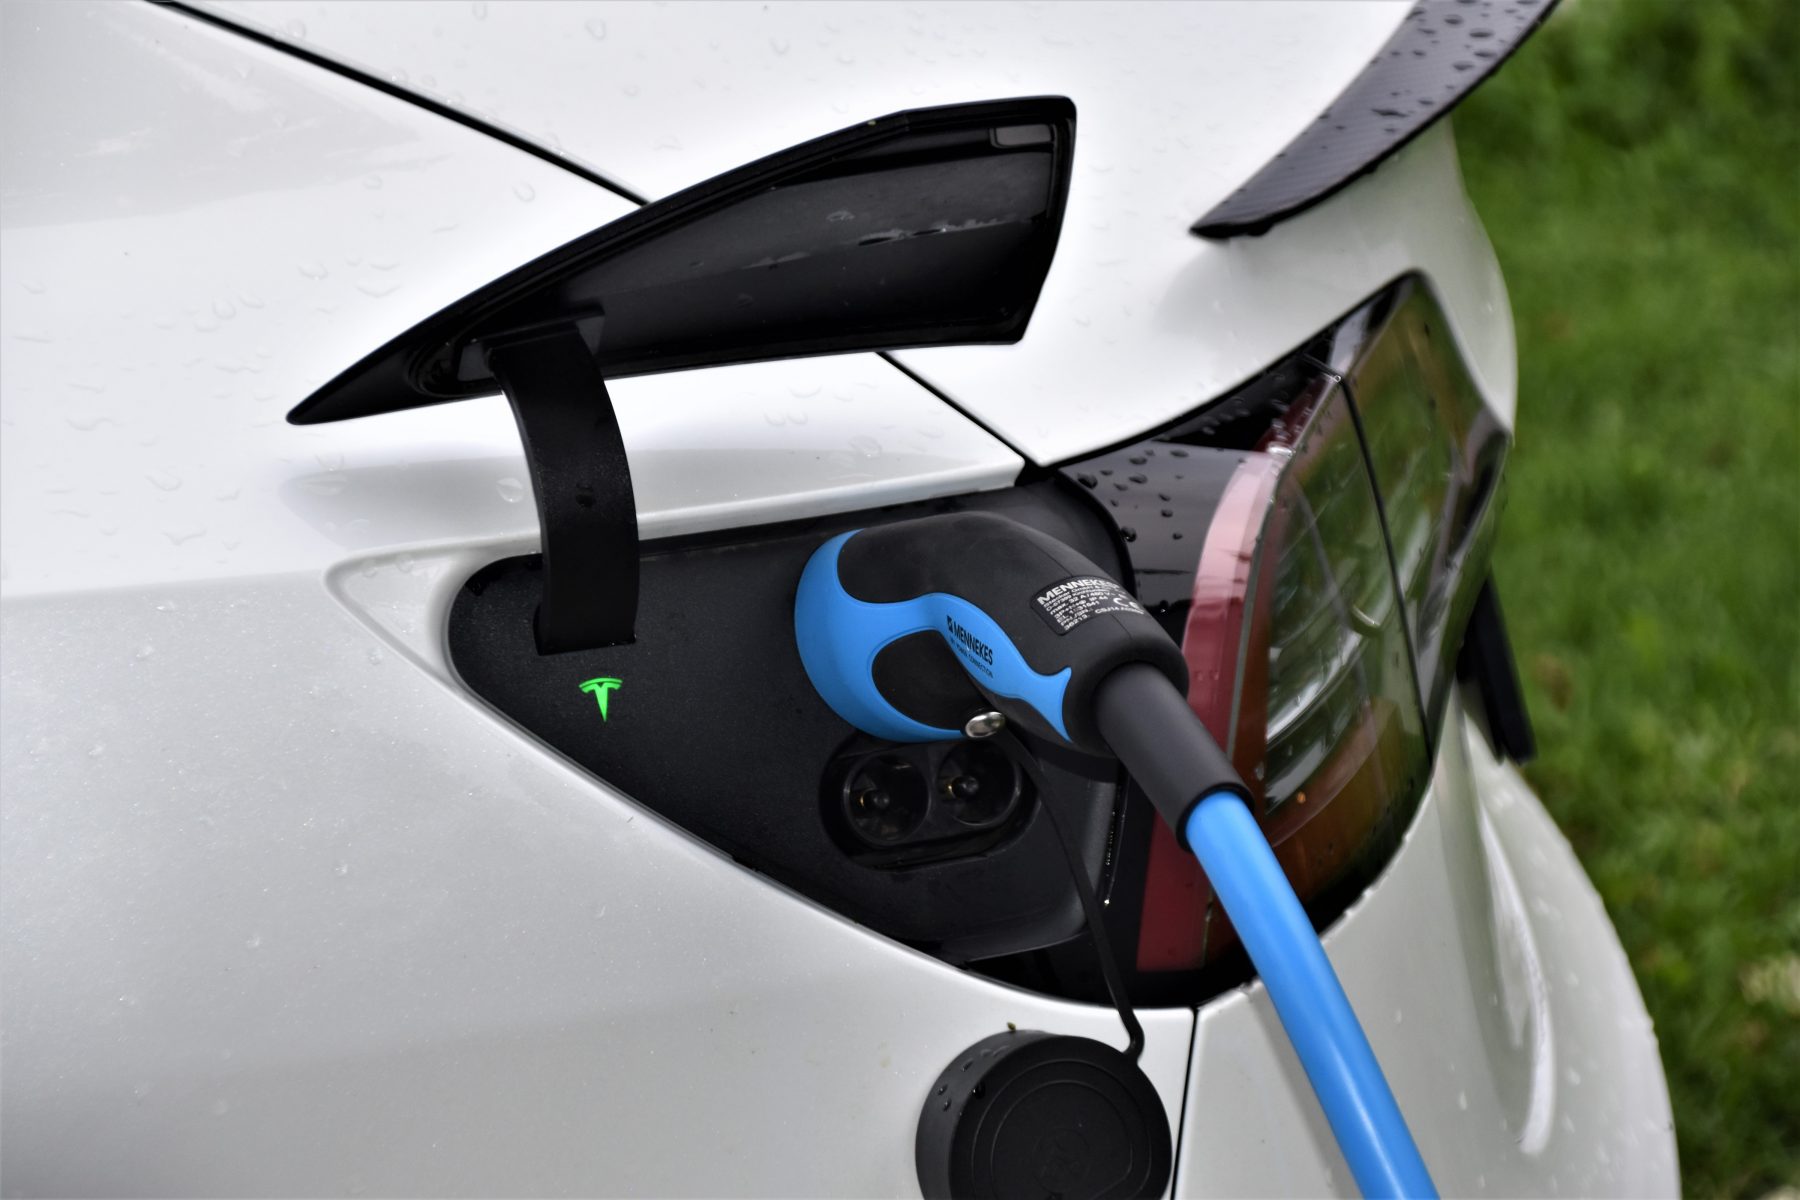 How Do Electric Vehicles Work? Electric Vehicle ComponentsEvo Energy